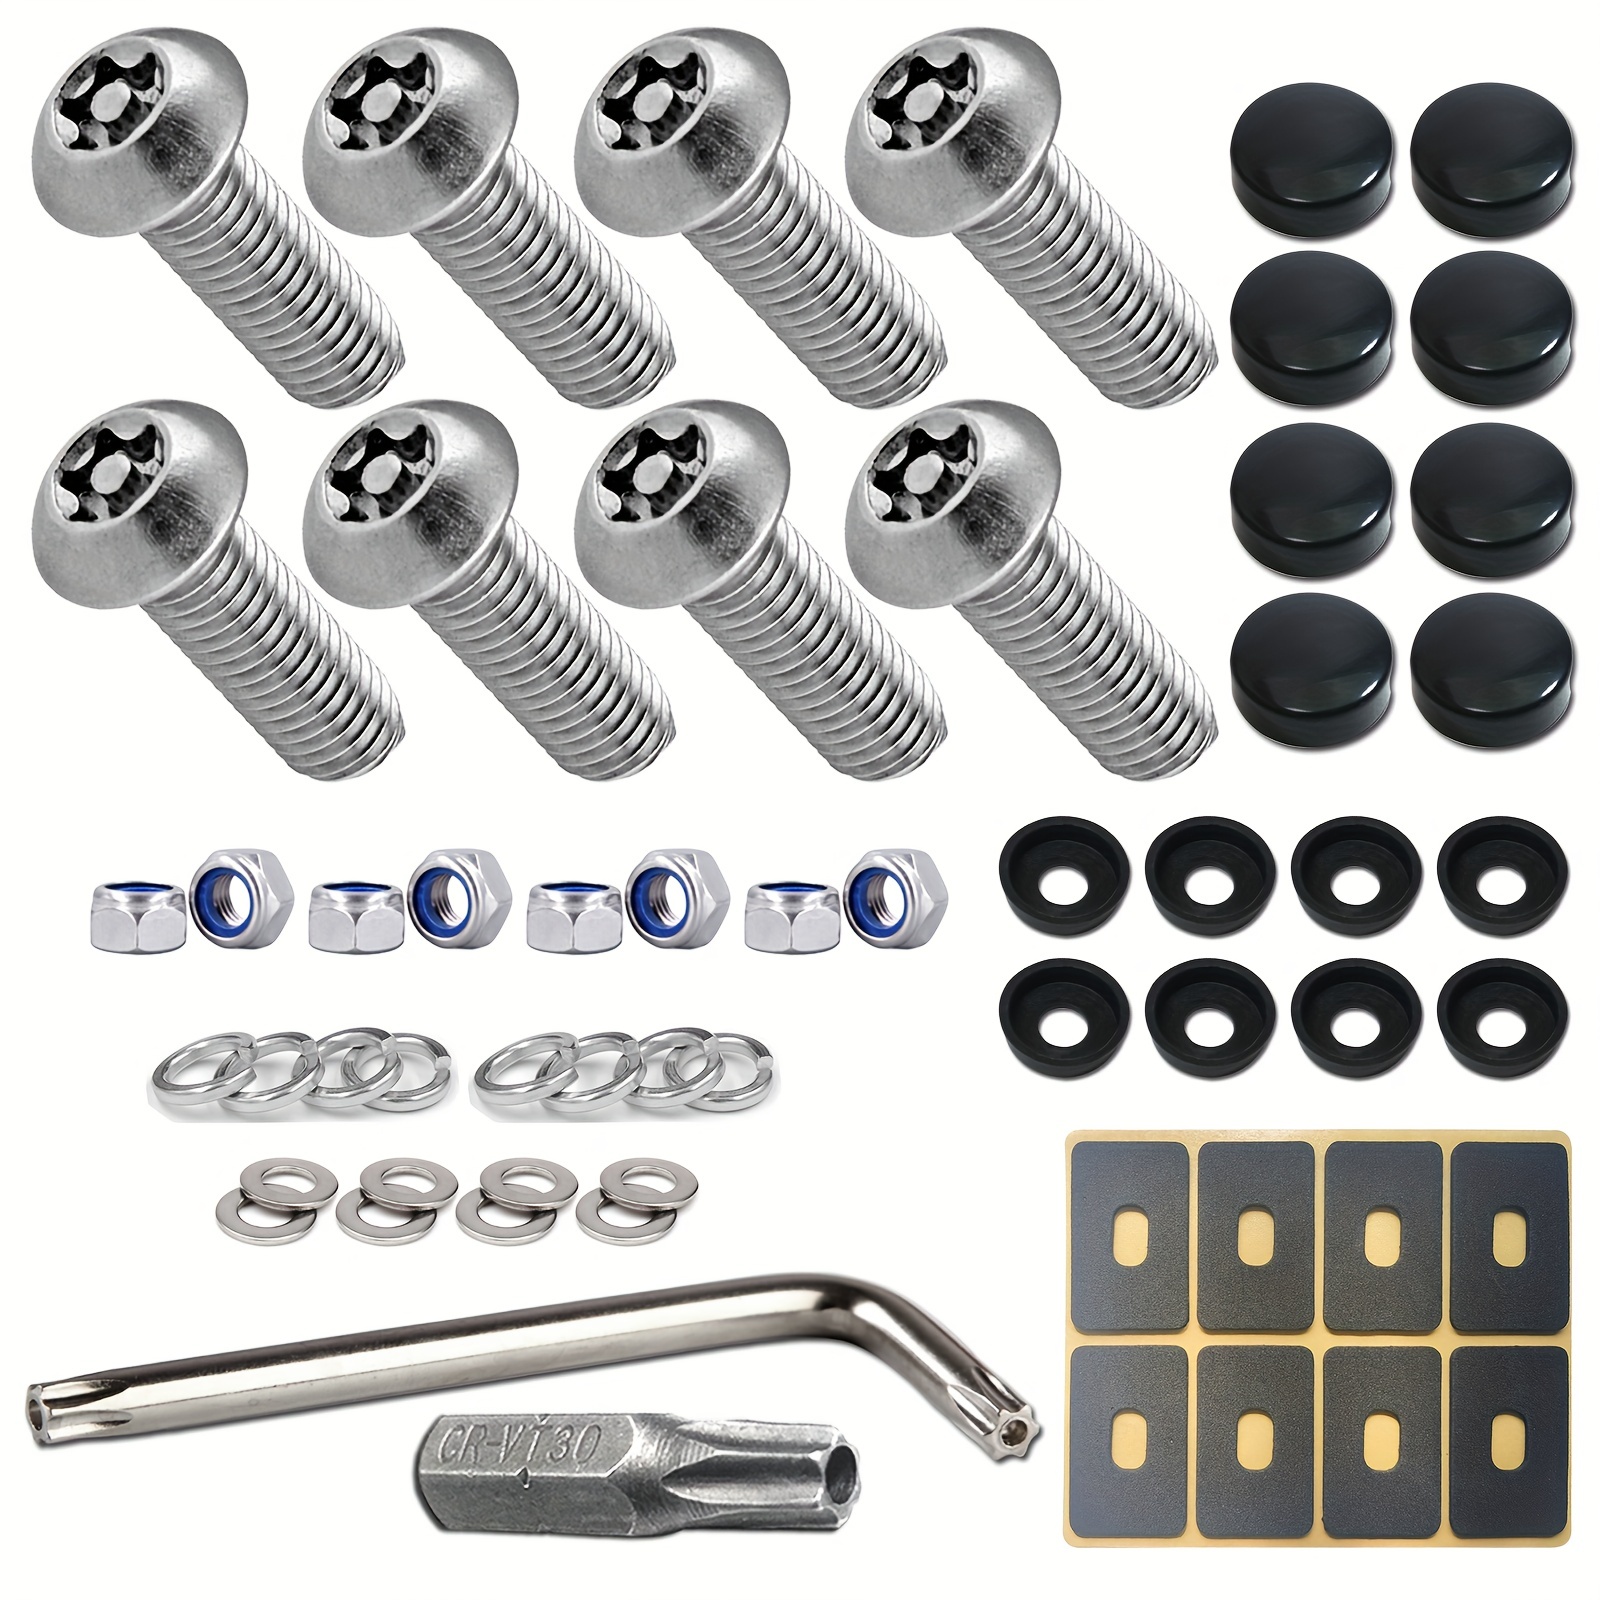 Anti Theft License Plate Screw Kit Tamper Proof Stainless Steel 1